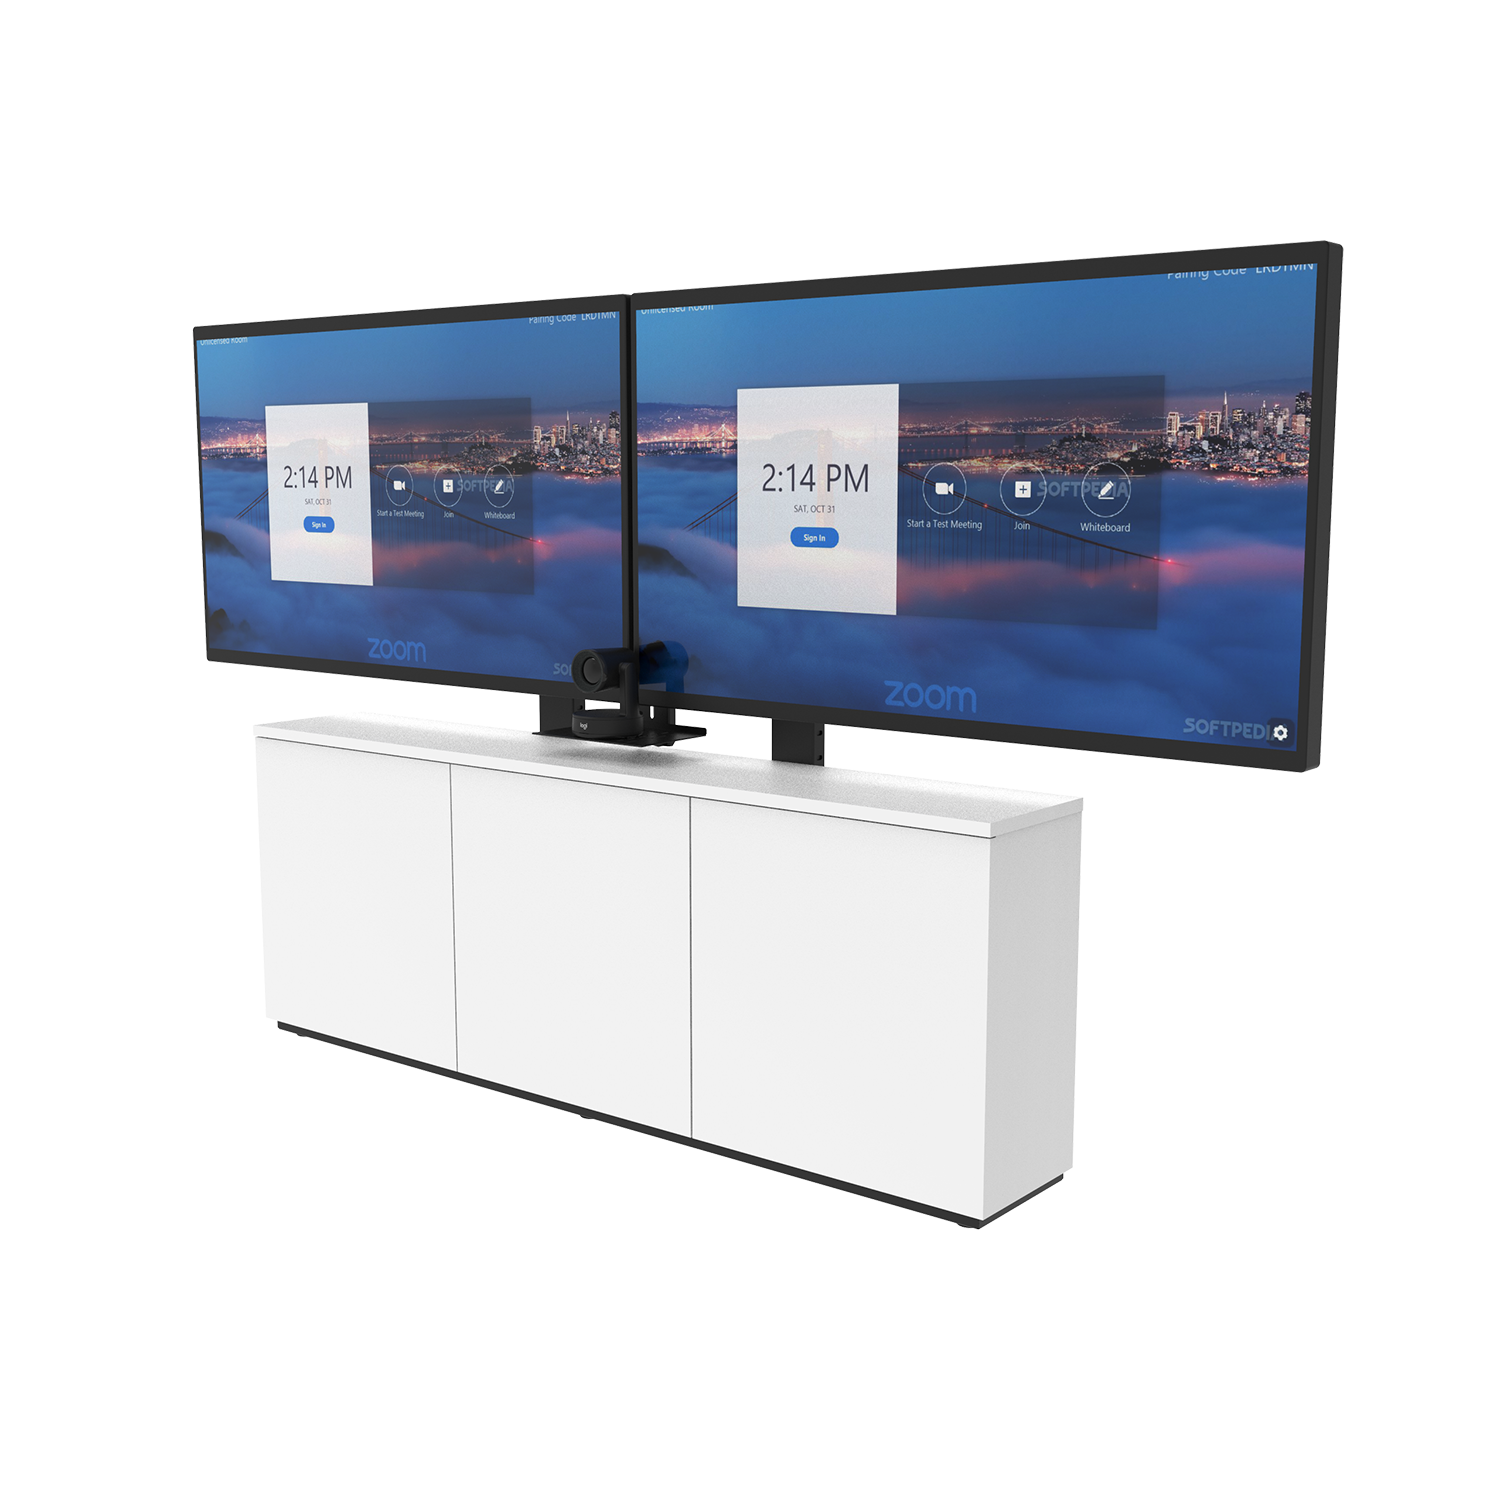 Thin 3-Bay Credenza Front Angled View with Dual Display and PTZ Camera White Finish